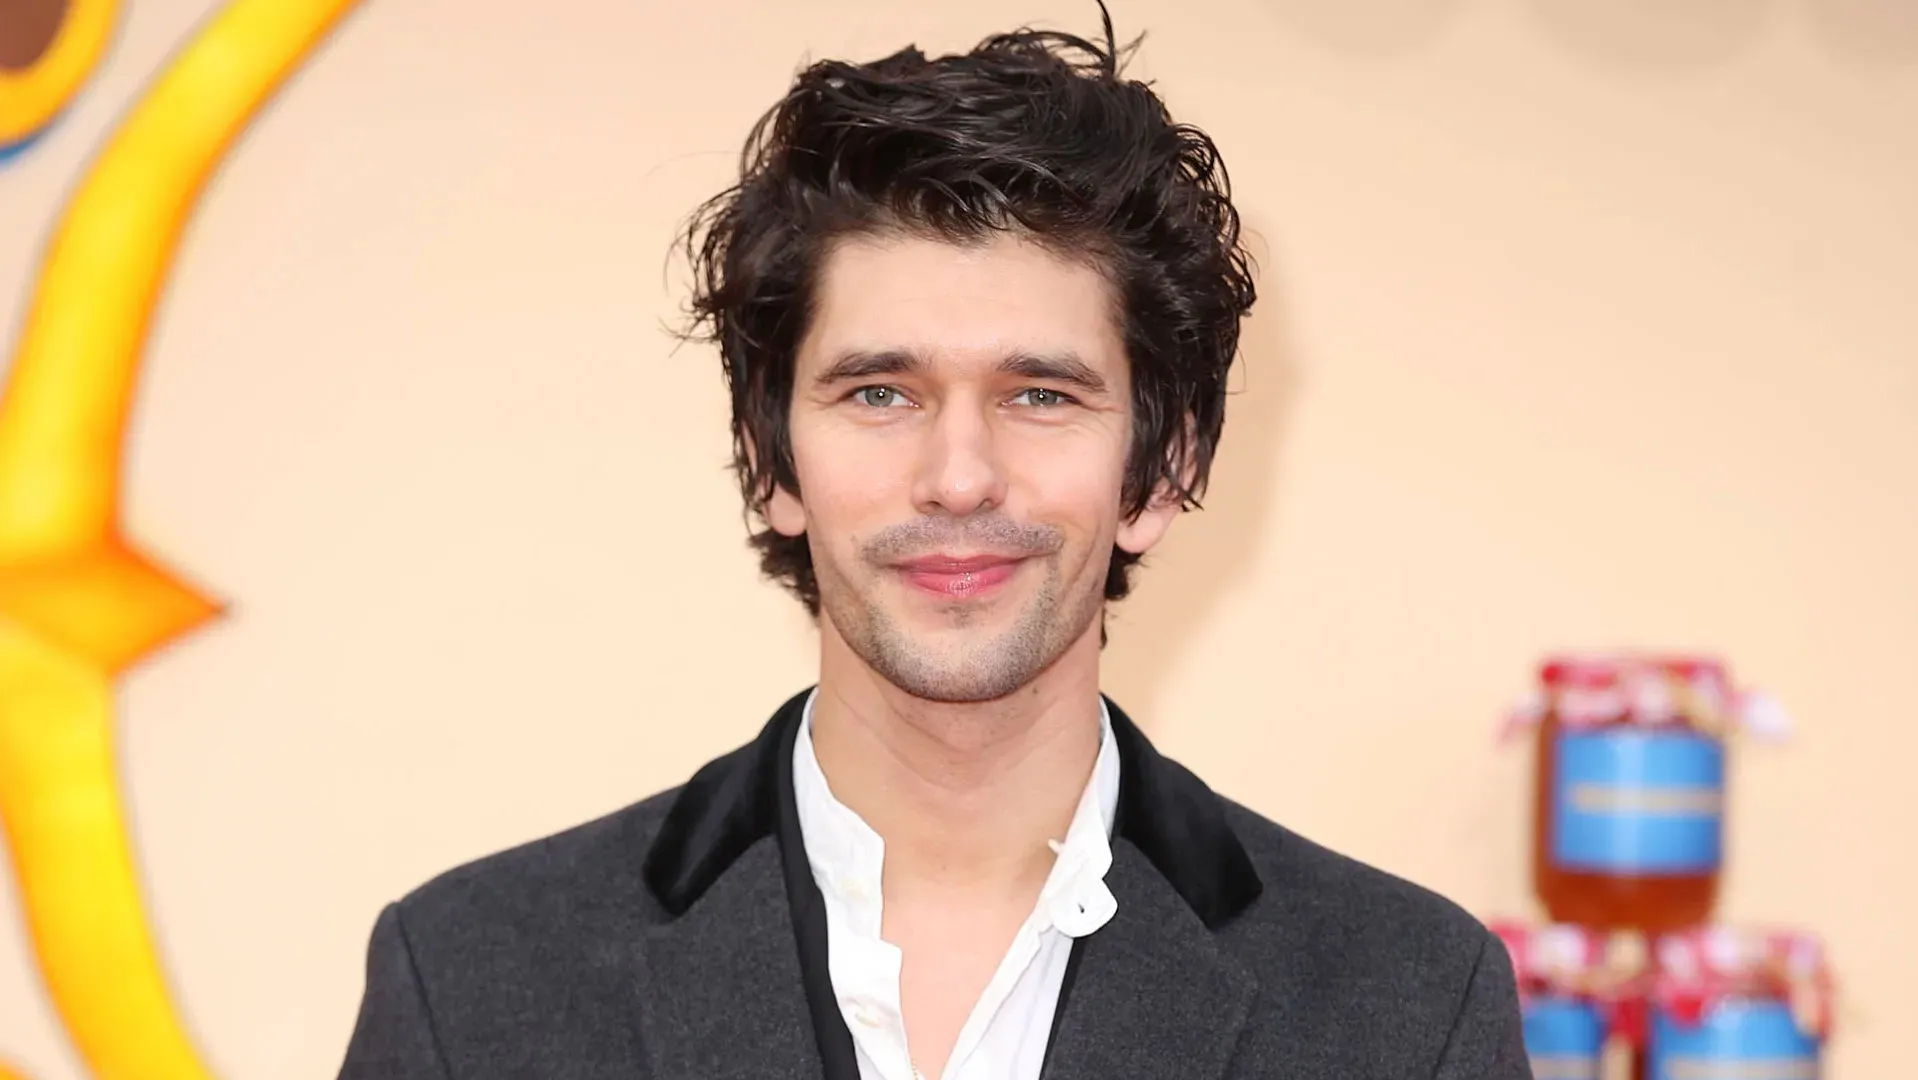 Jennifer Connelly and Ben Whishaw to star in black comedy 'Bad Behaviour' directed and starring by Alice Englert | FMV6